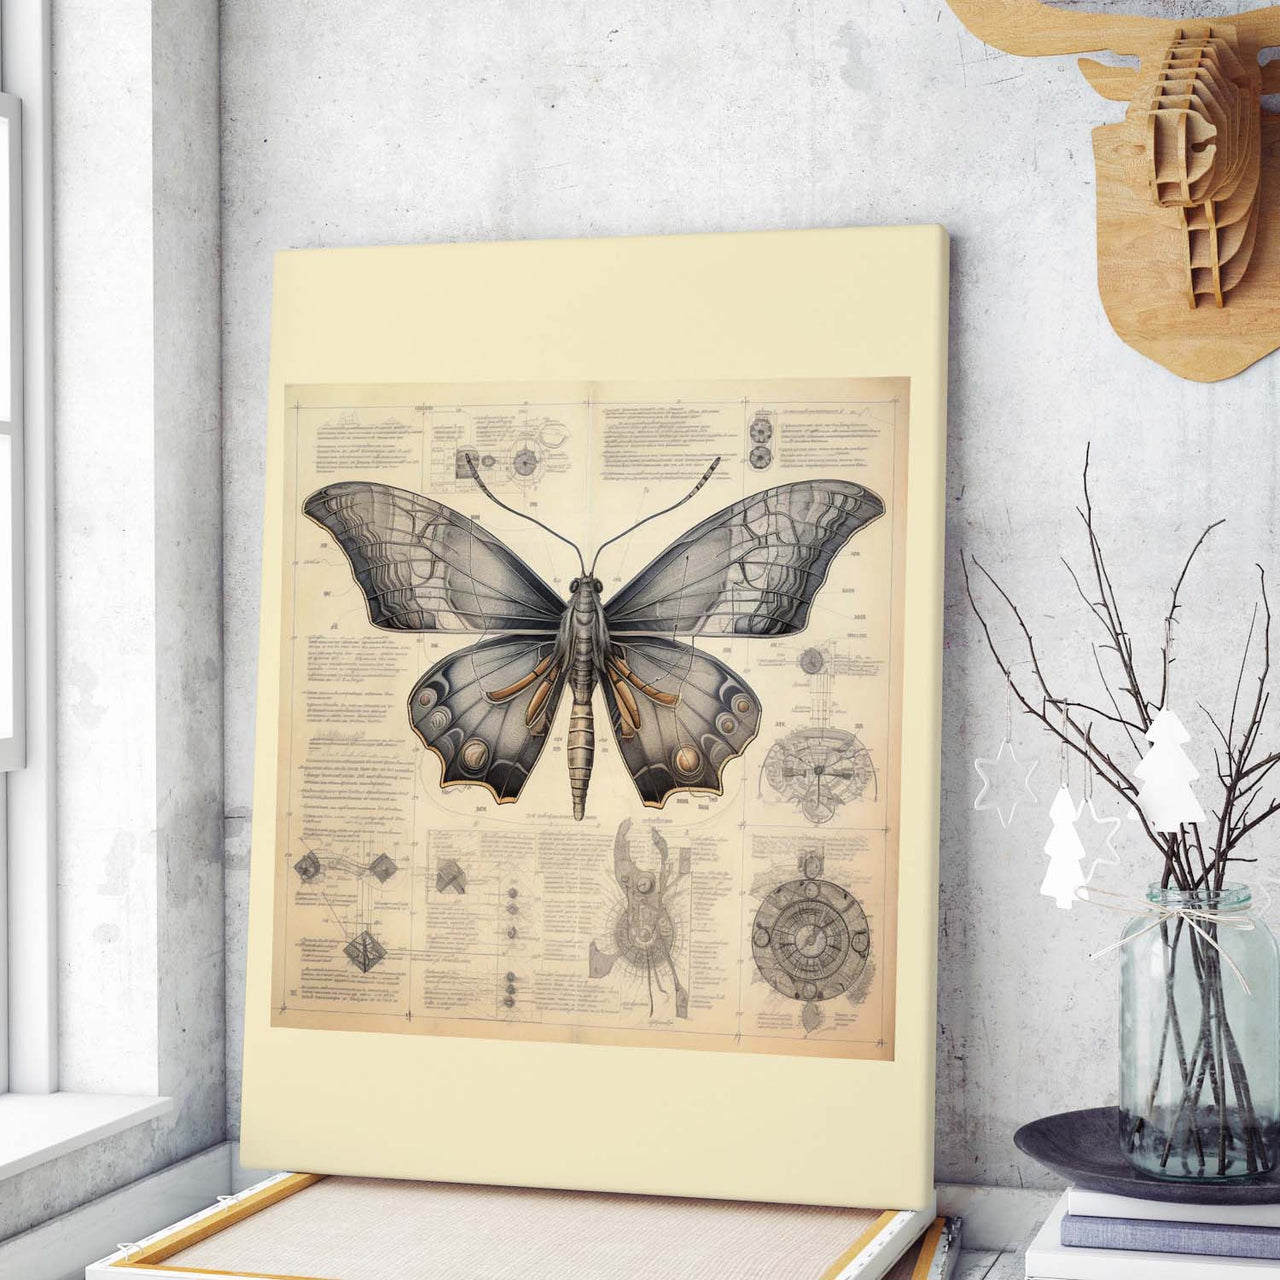 Drawings Butterfly Da Vinci Style Vintage Framed Canvas Prints Wall Art Hanging Home Decor